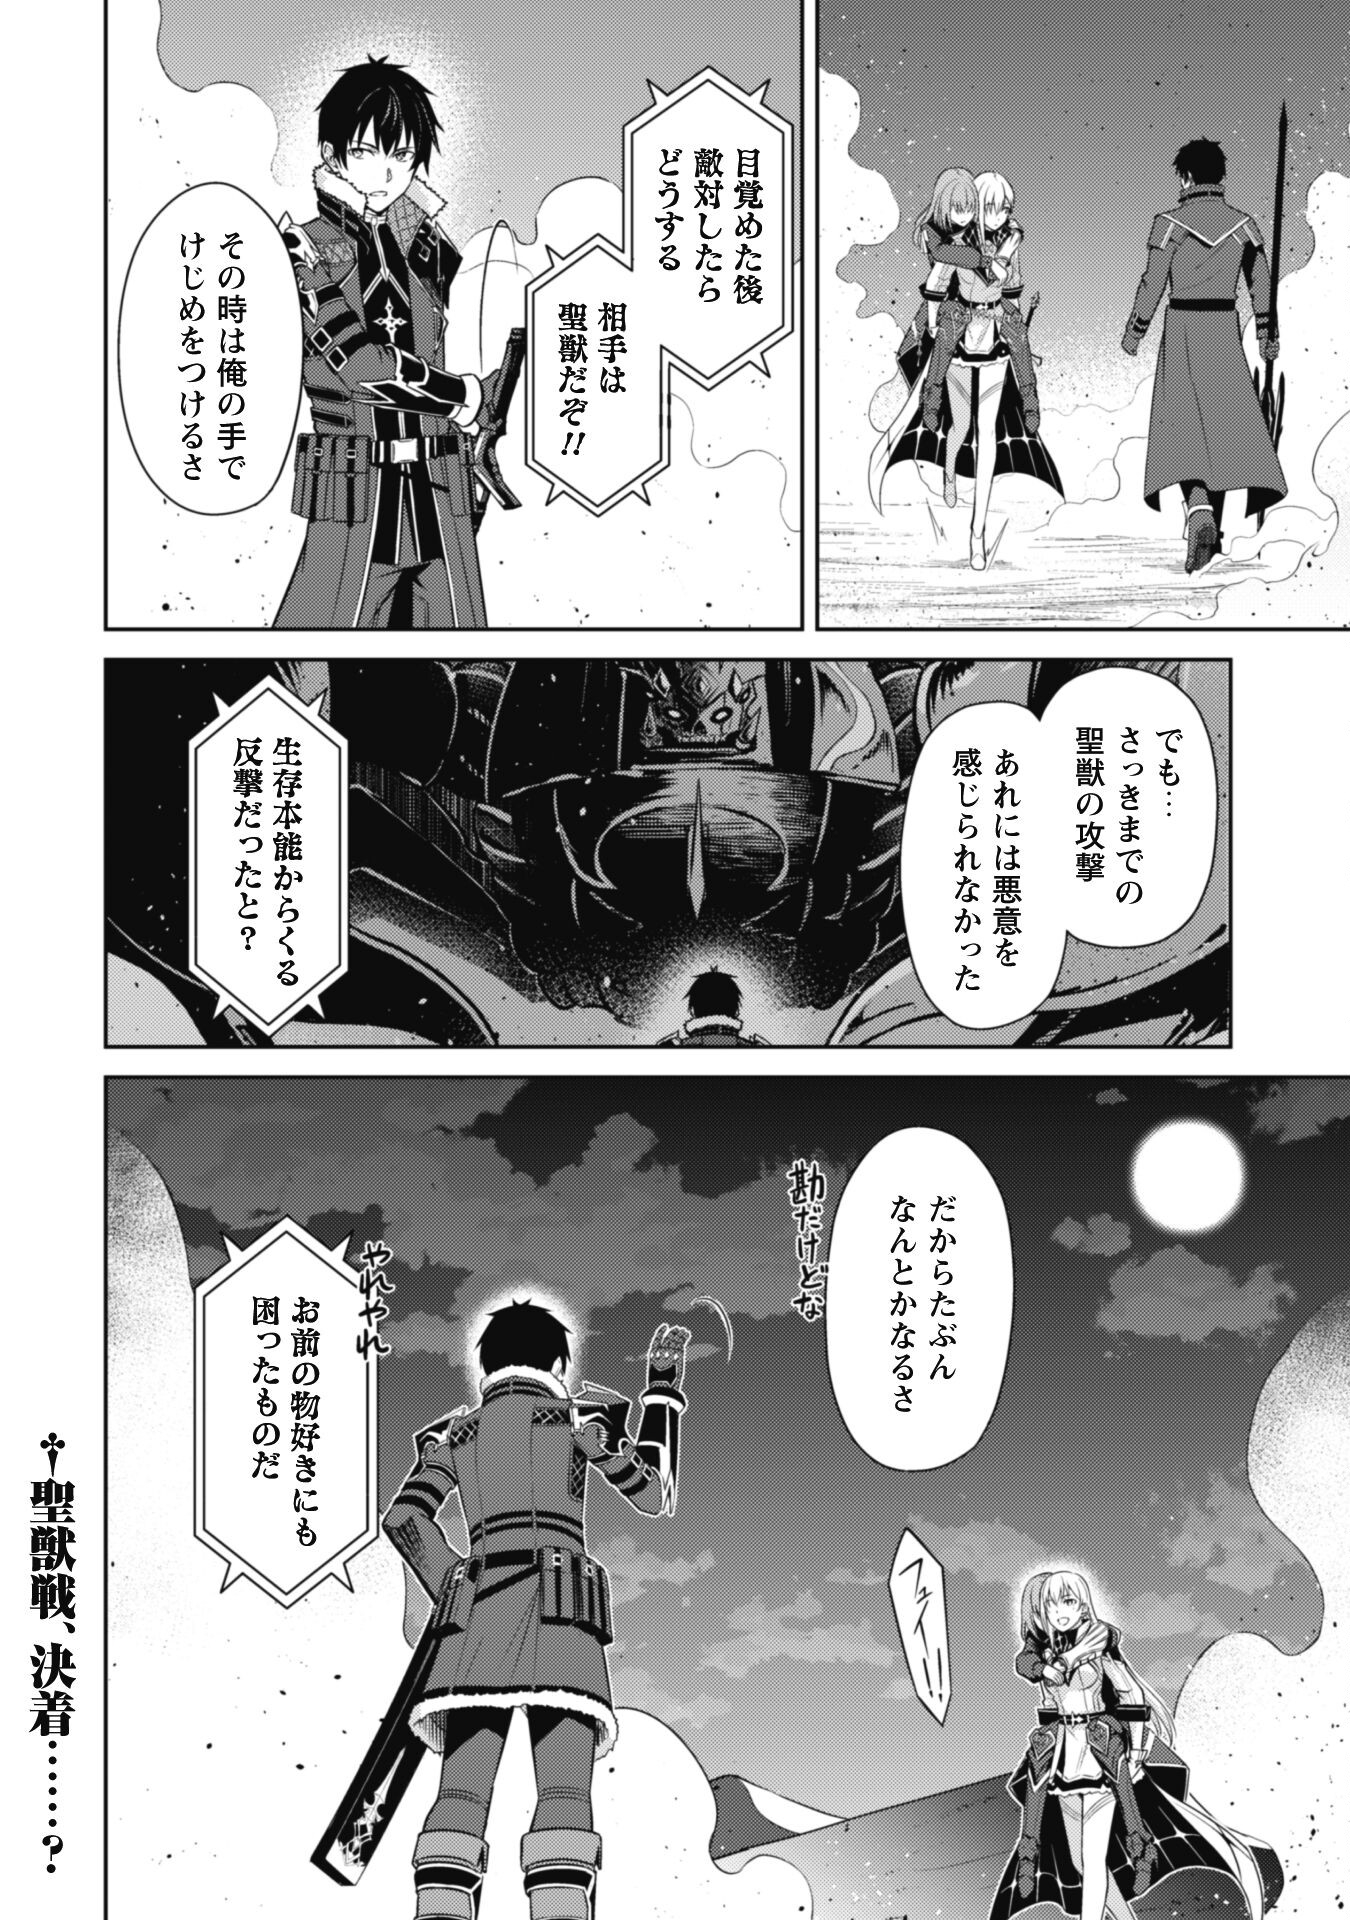 Berserk of Gluttony - Chapter 62 - Page 24